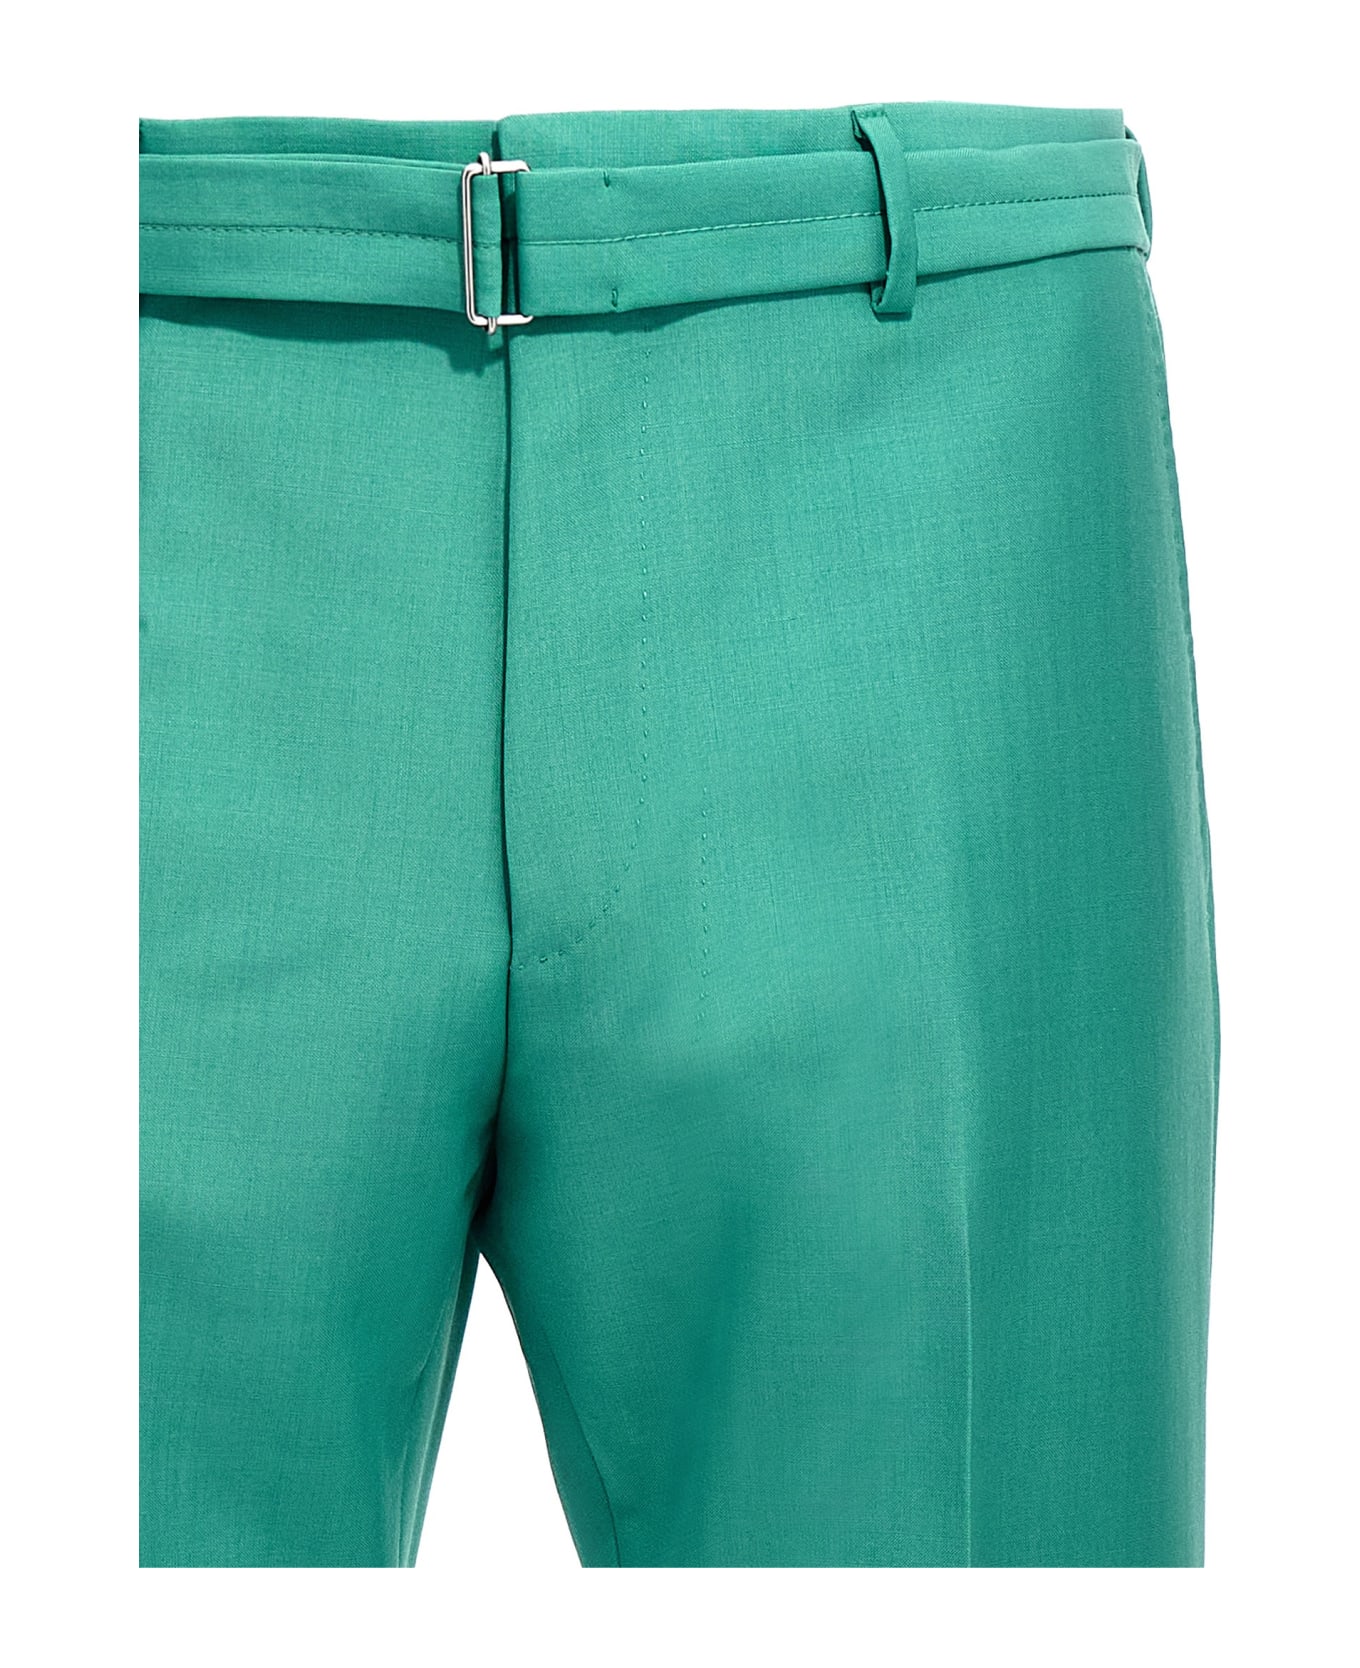 Lanvin Belted Pants - Green ボトムス